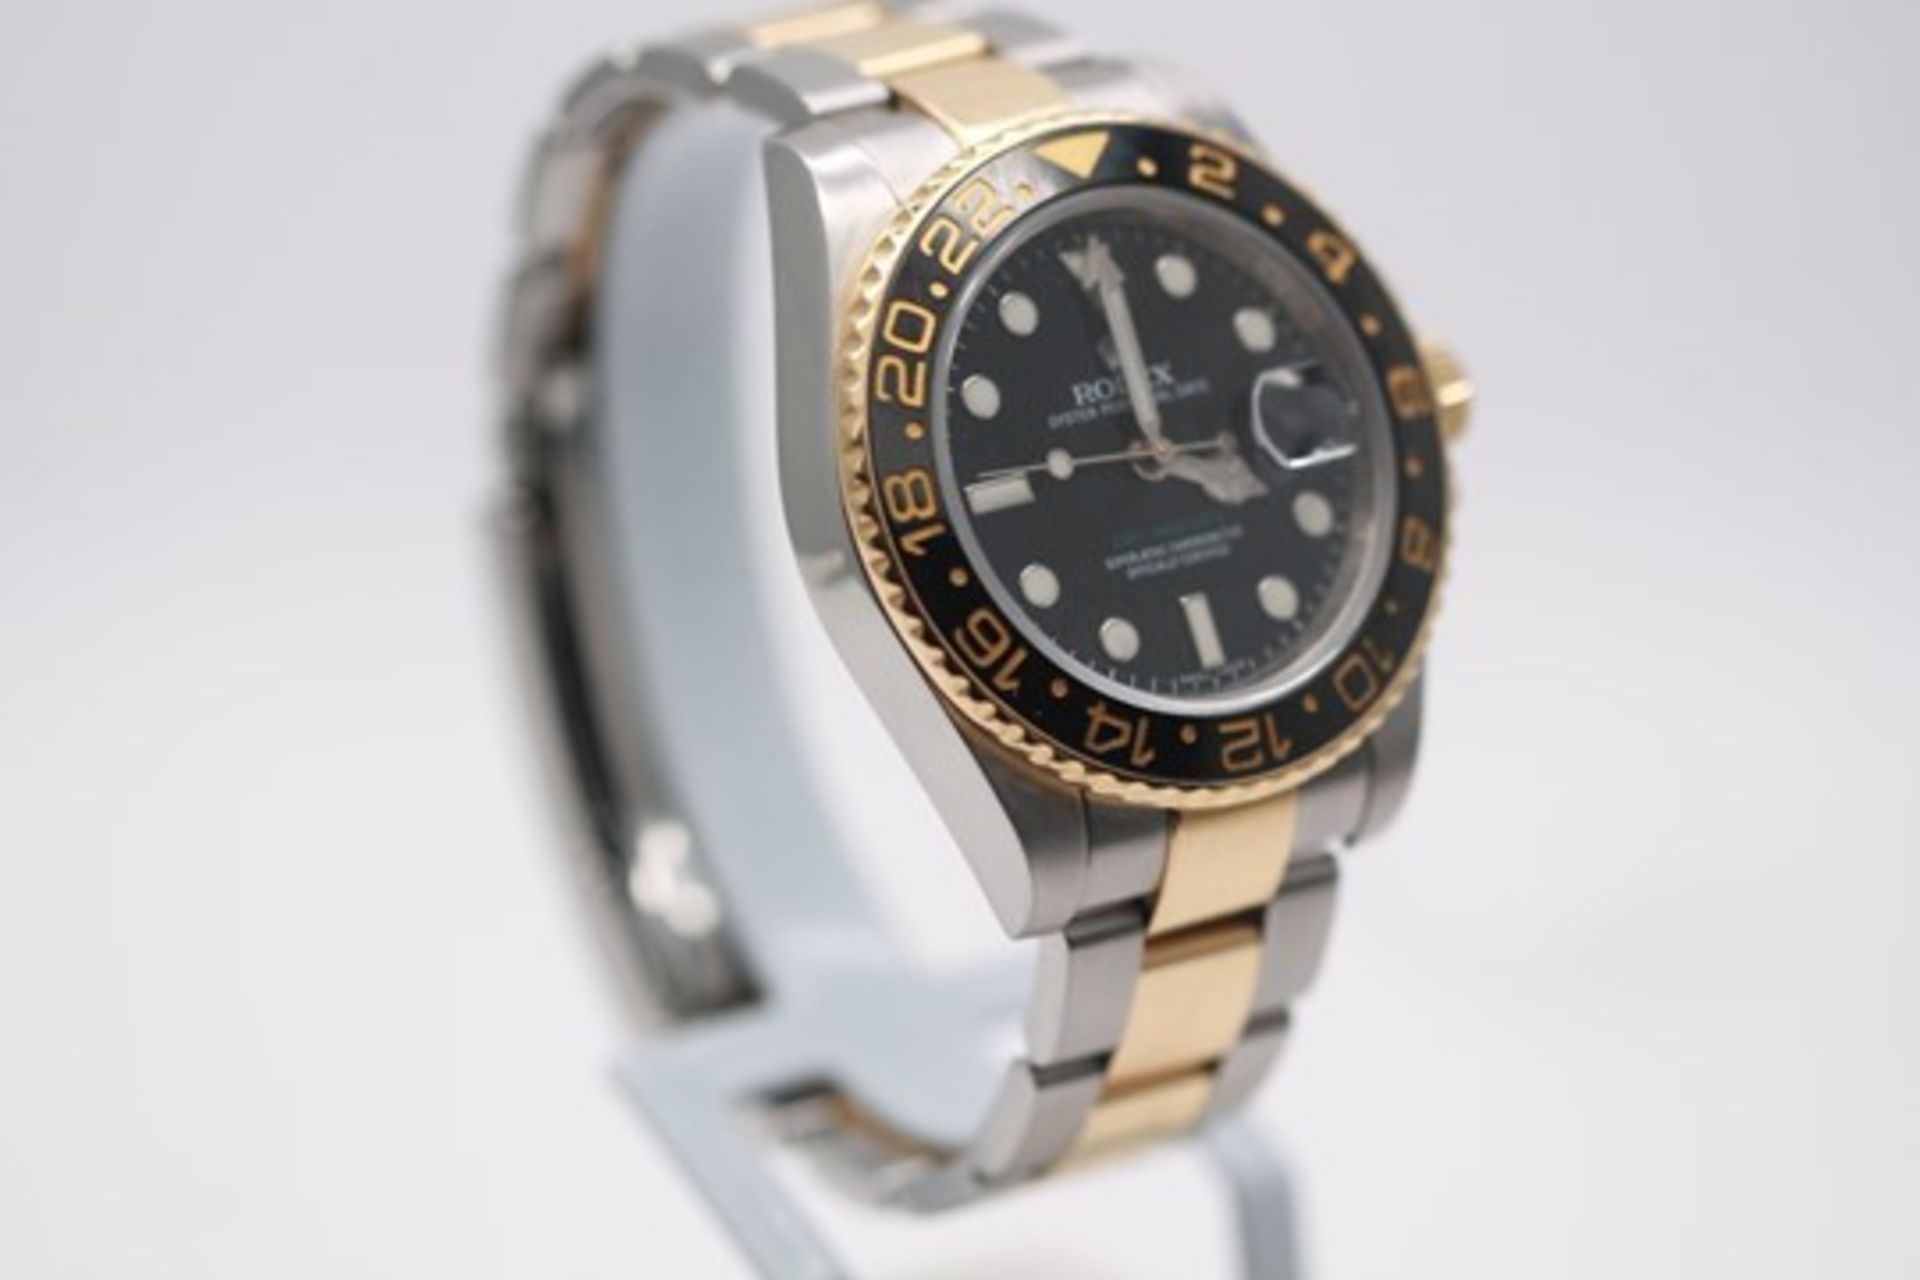 Gents 2008 Rolex, GMT Master Ii Bi Metal With Oyster Strap ***Reserve lowered 19.6.18 at 11:05*** - Image 2 of 6